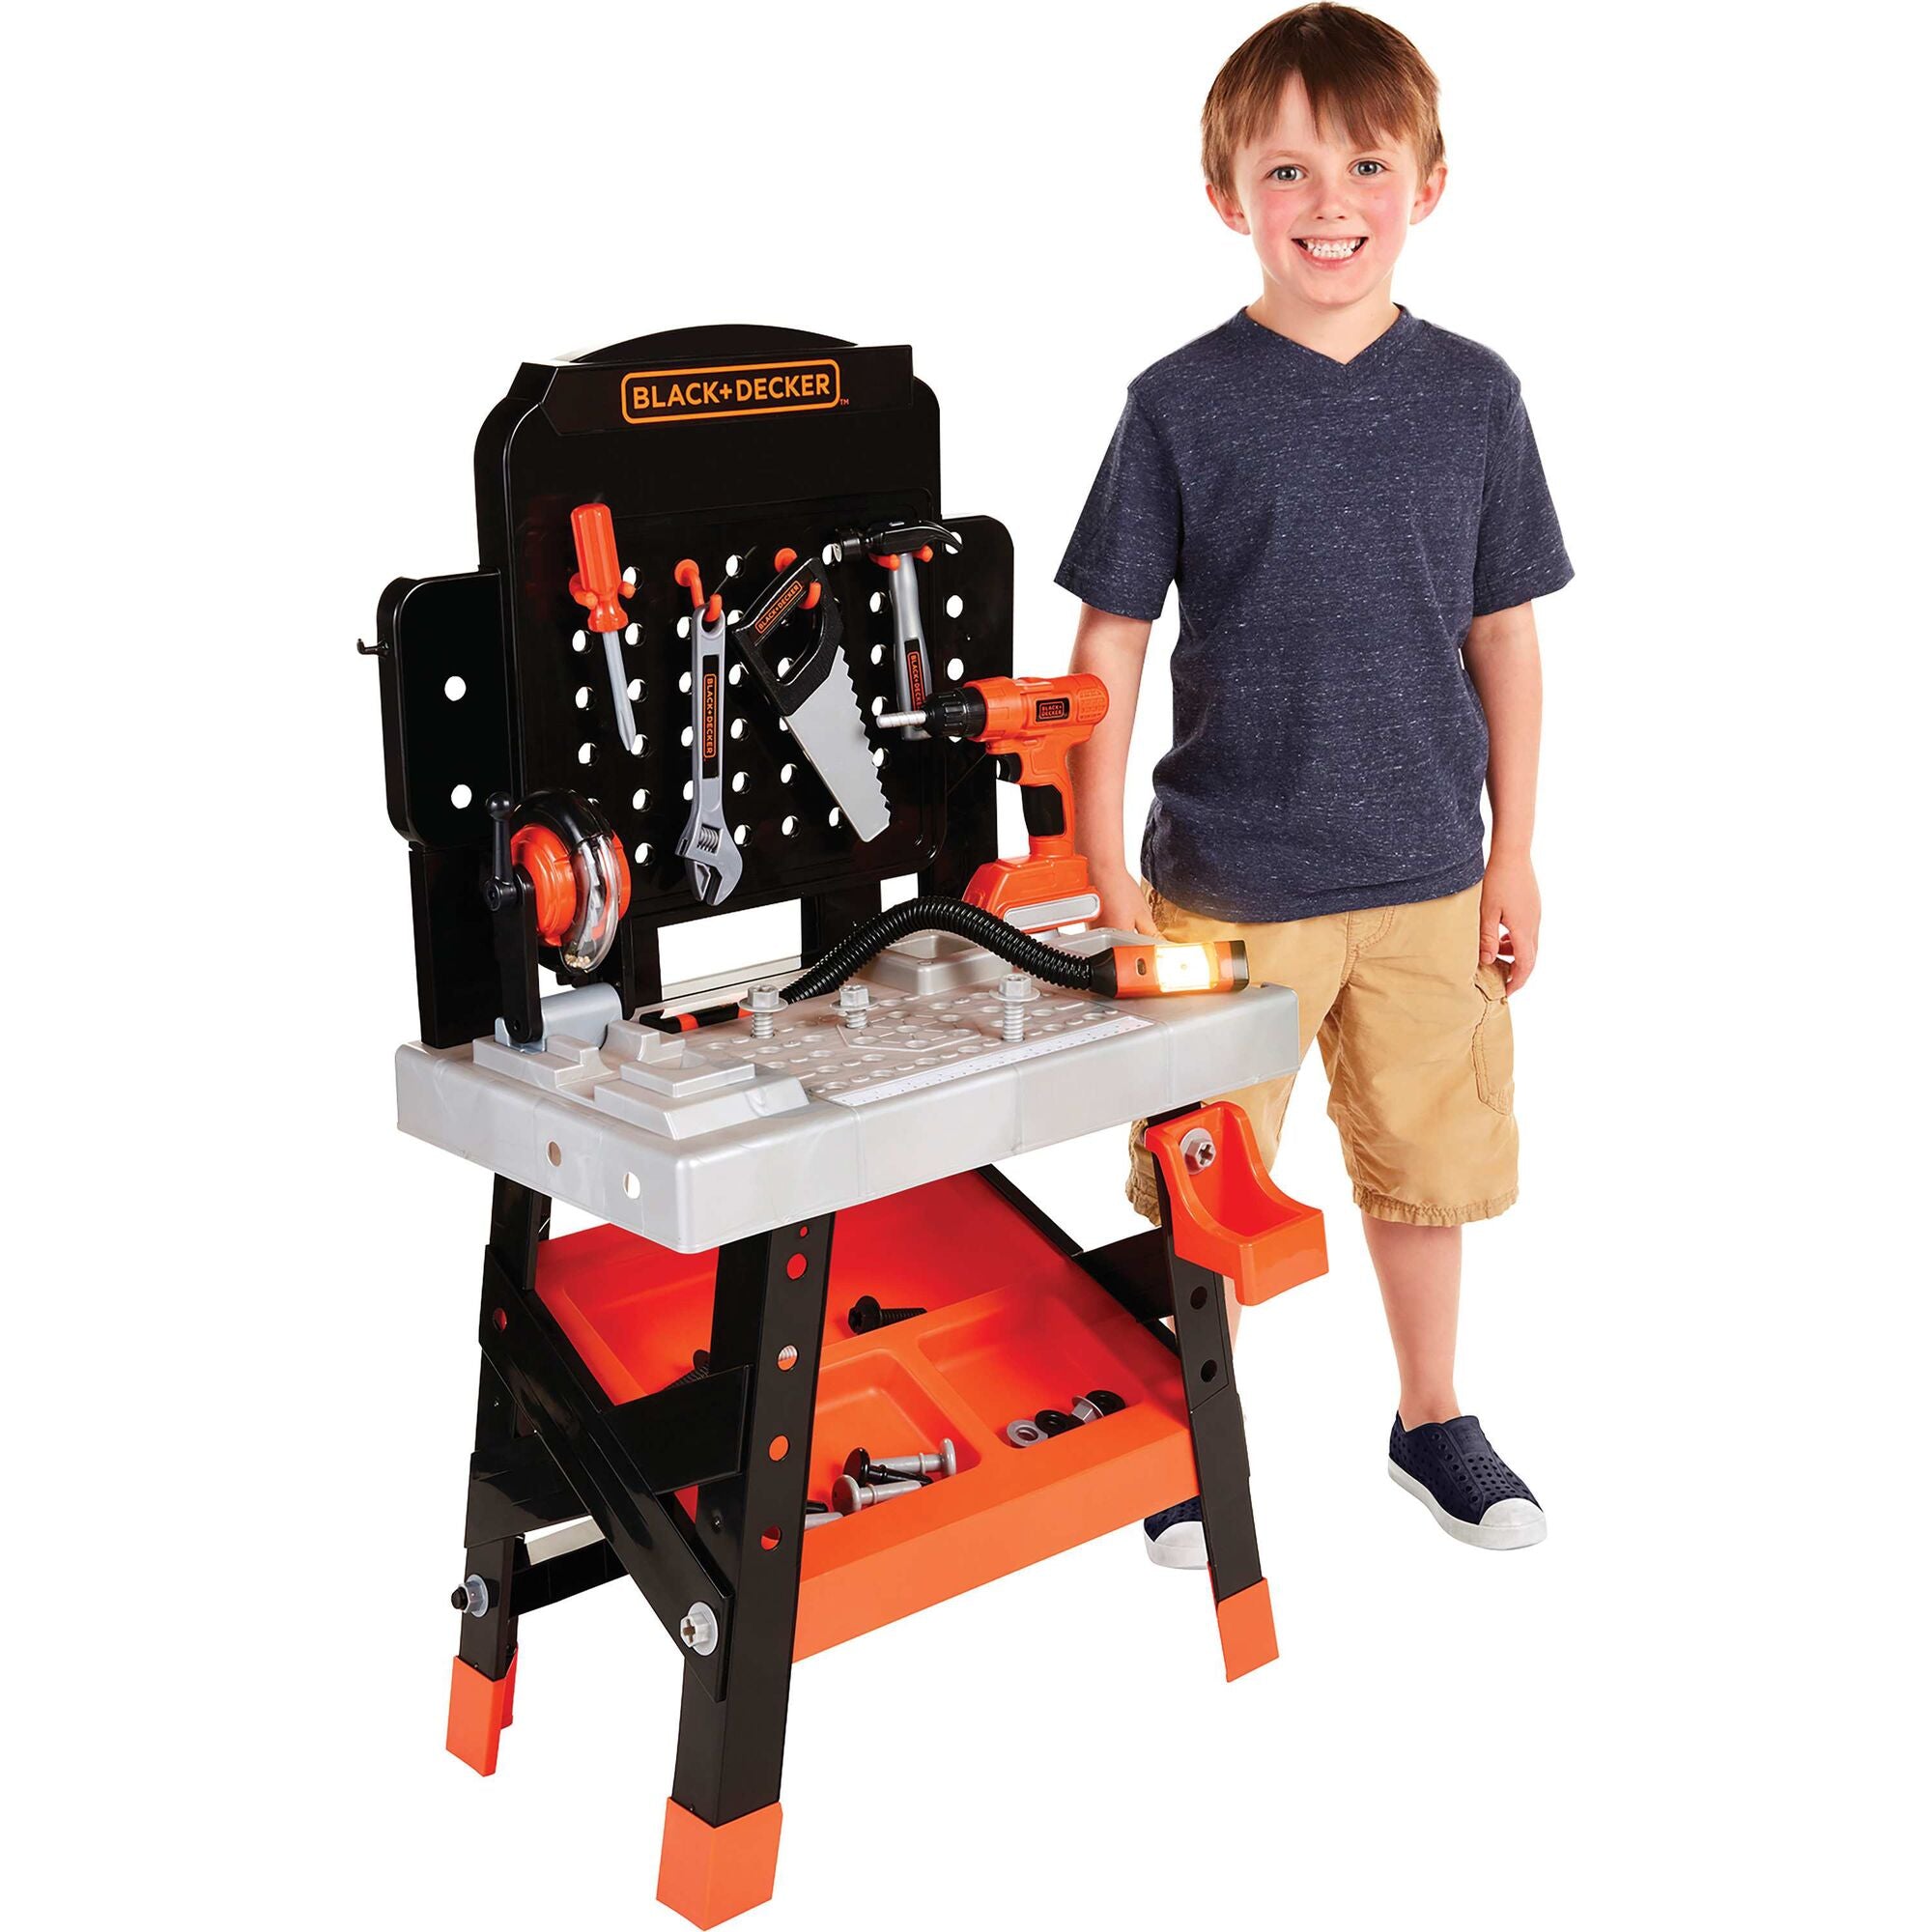  Black+Decker Kids Workbench - Power Tools Workshop - Build Your  Own Toy Tool Box – 75 Realistic Toy Tools and Accessories [  Exclusive] 38 x 16.25 x 21 inches : Toys & Games